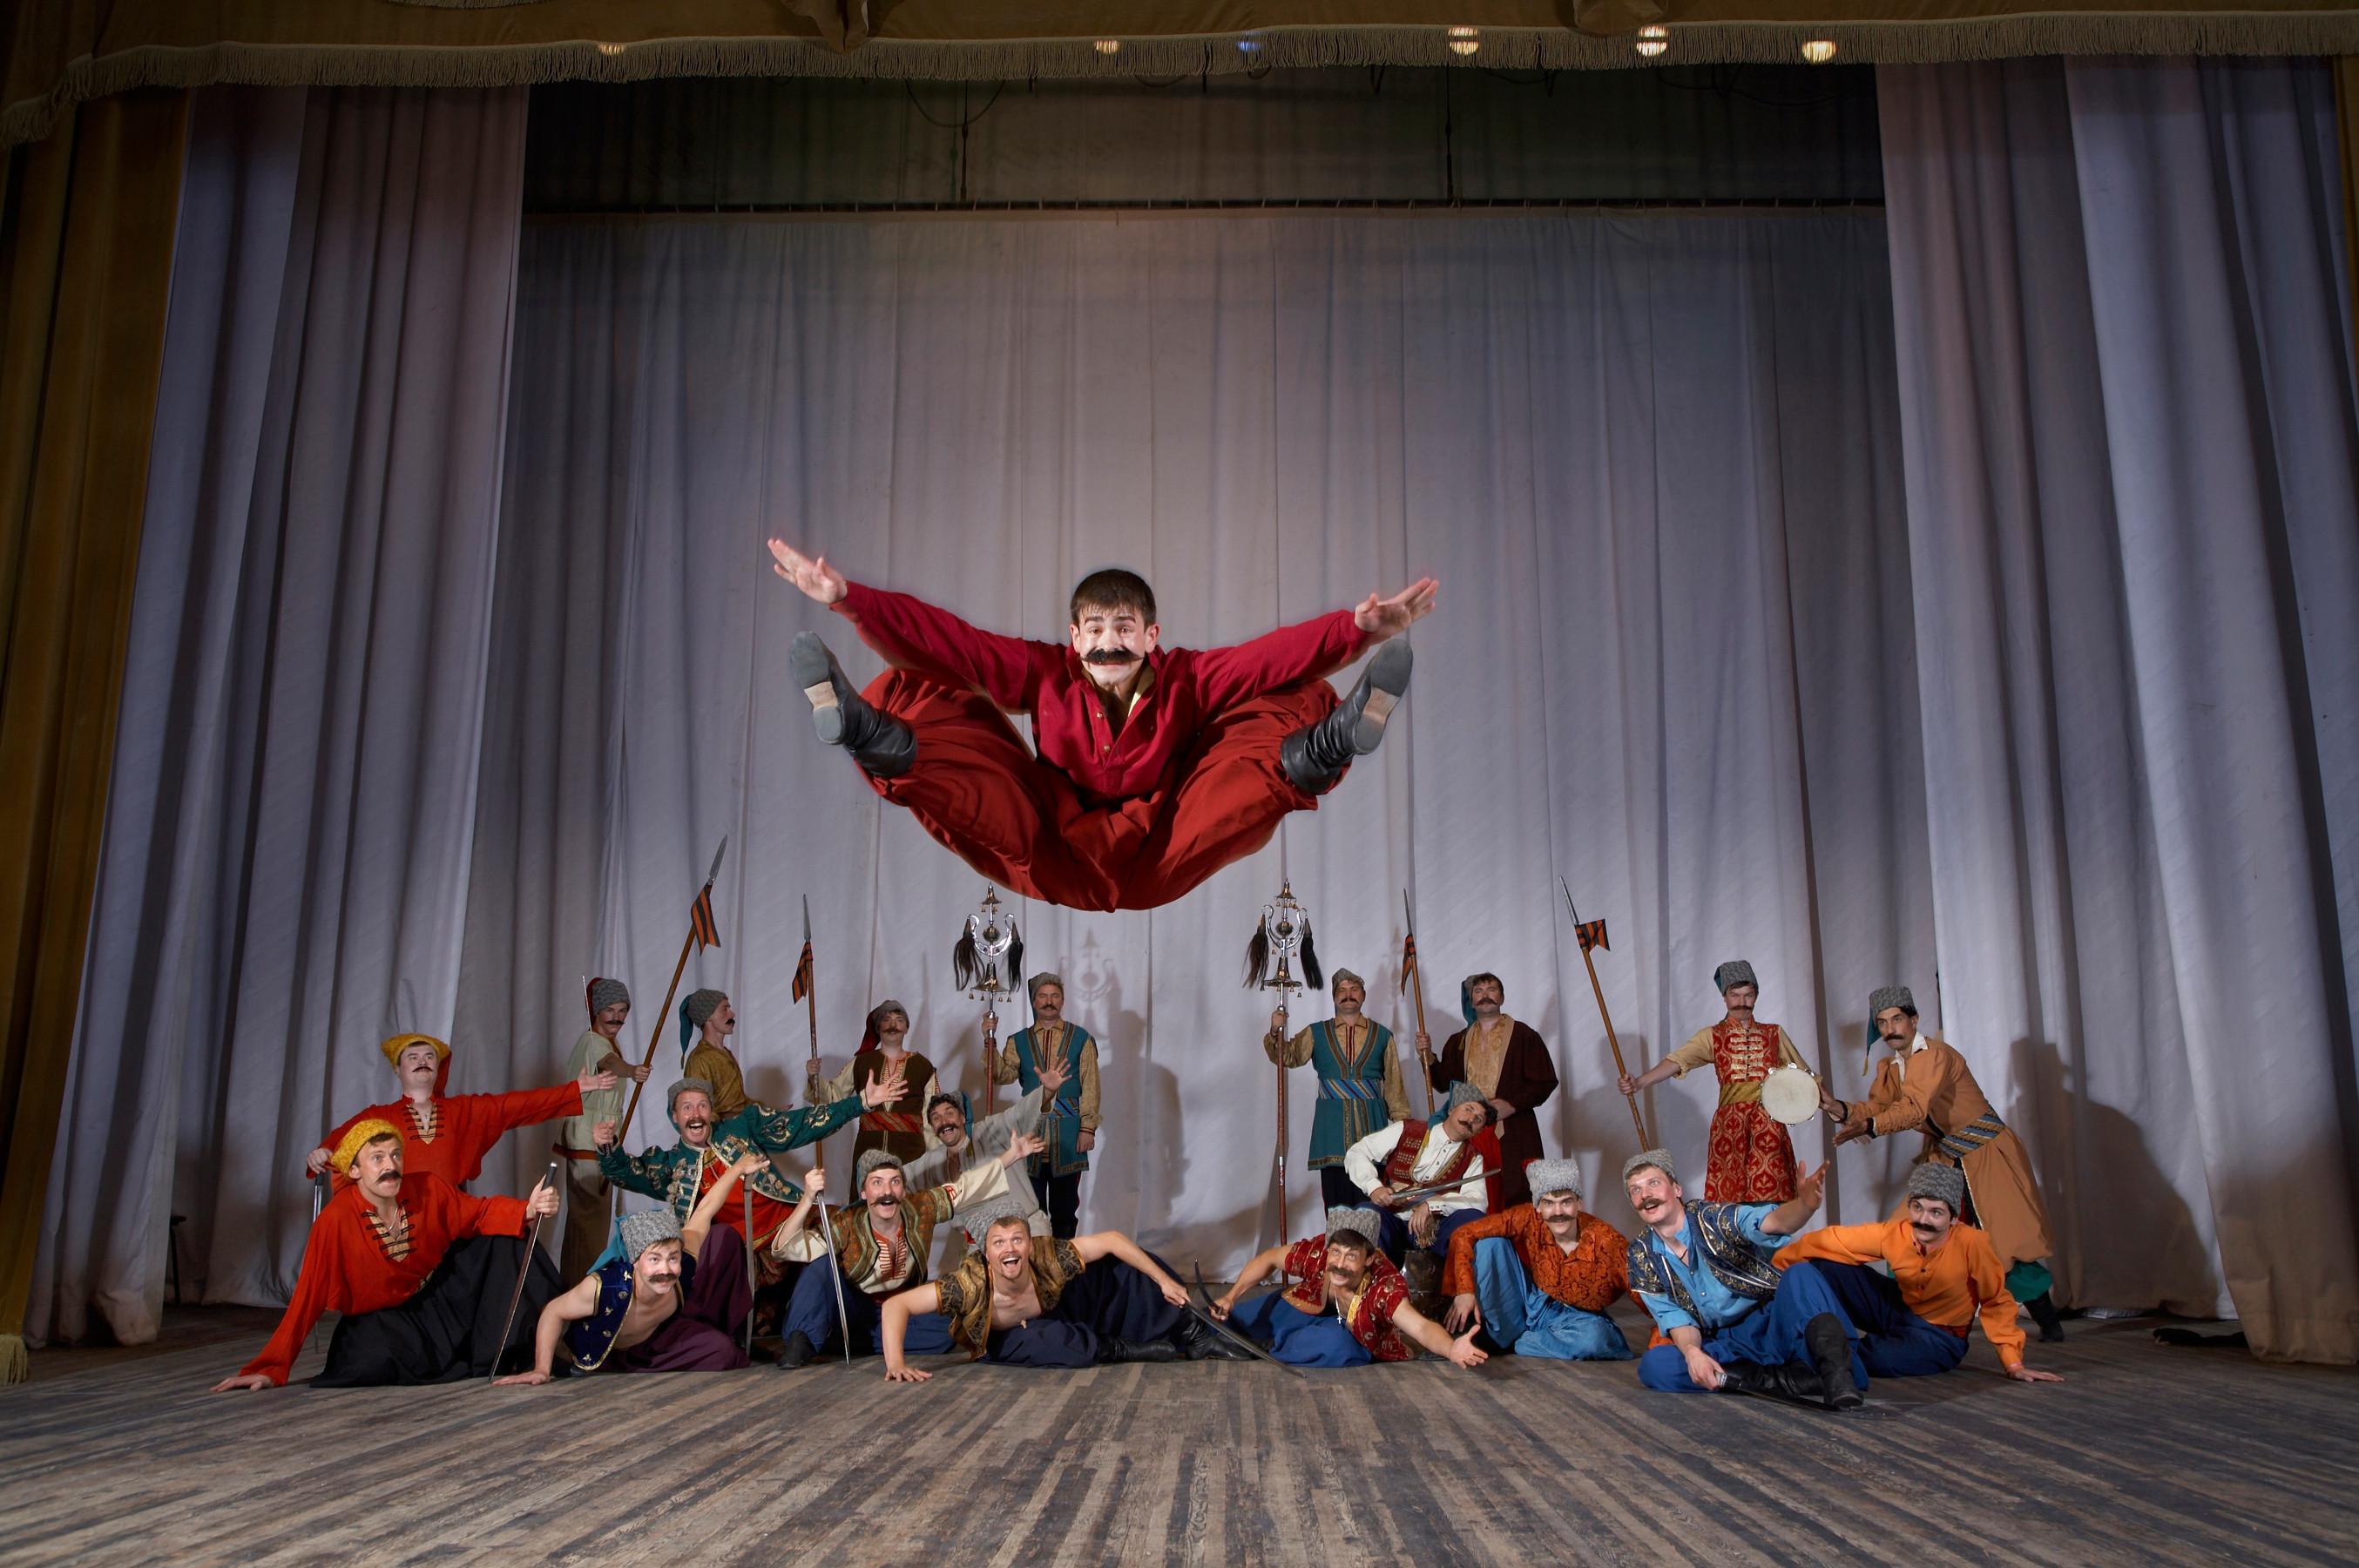 The Leisure and Cultural Services Department will present two brilliant performances by the Don Cossacks State Academic Song and Dance Ensemble in honour of Anatoly Kvasov in late May. Photo shows a scene from past performance by the Don Cossacks State Academic Song and Dance Ensemble in honour of Anatoly Kvasov.